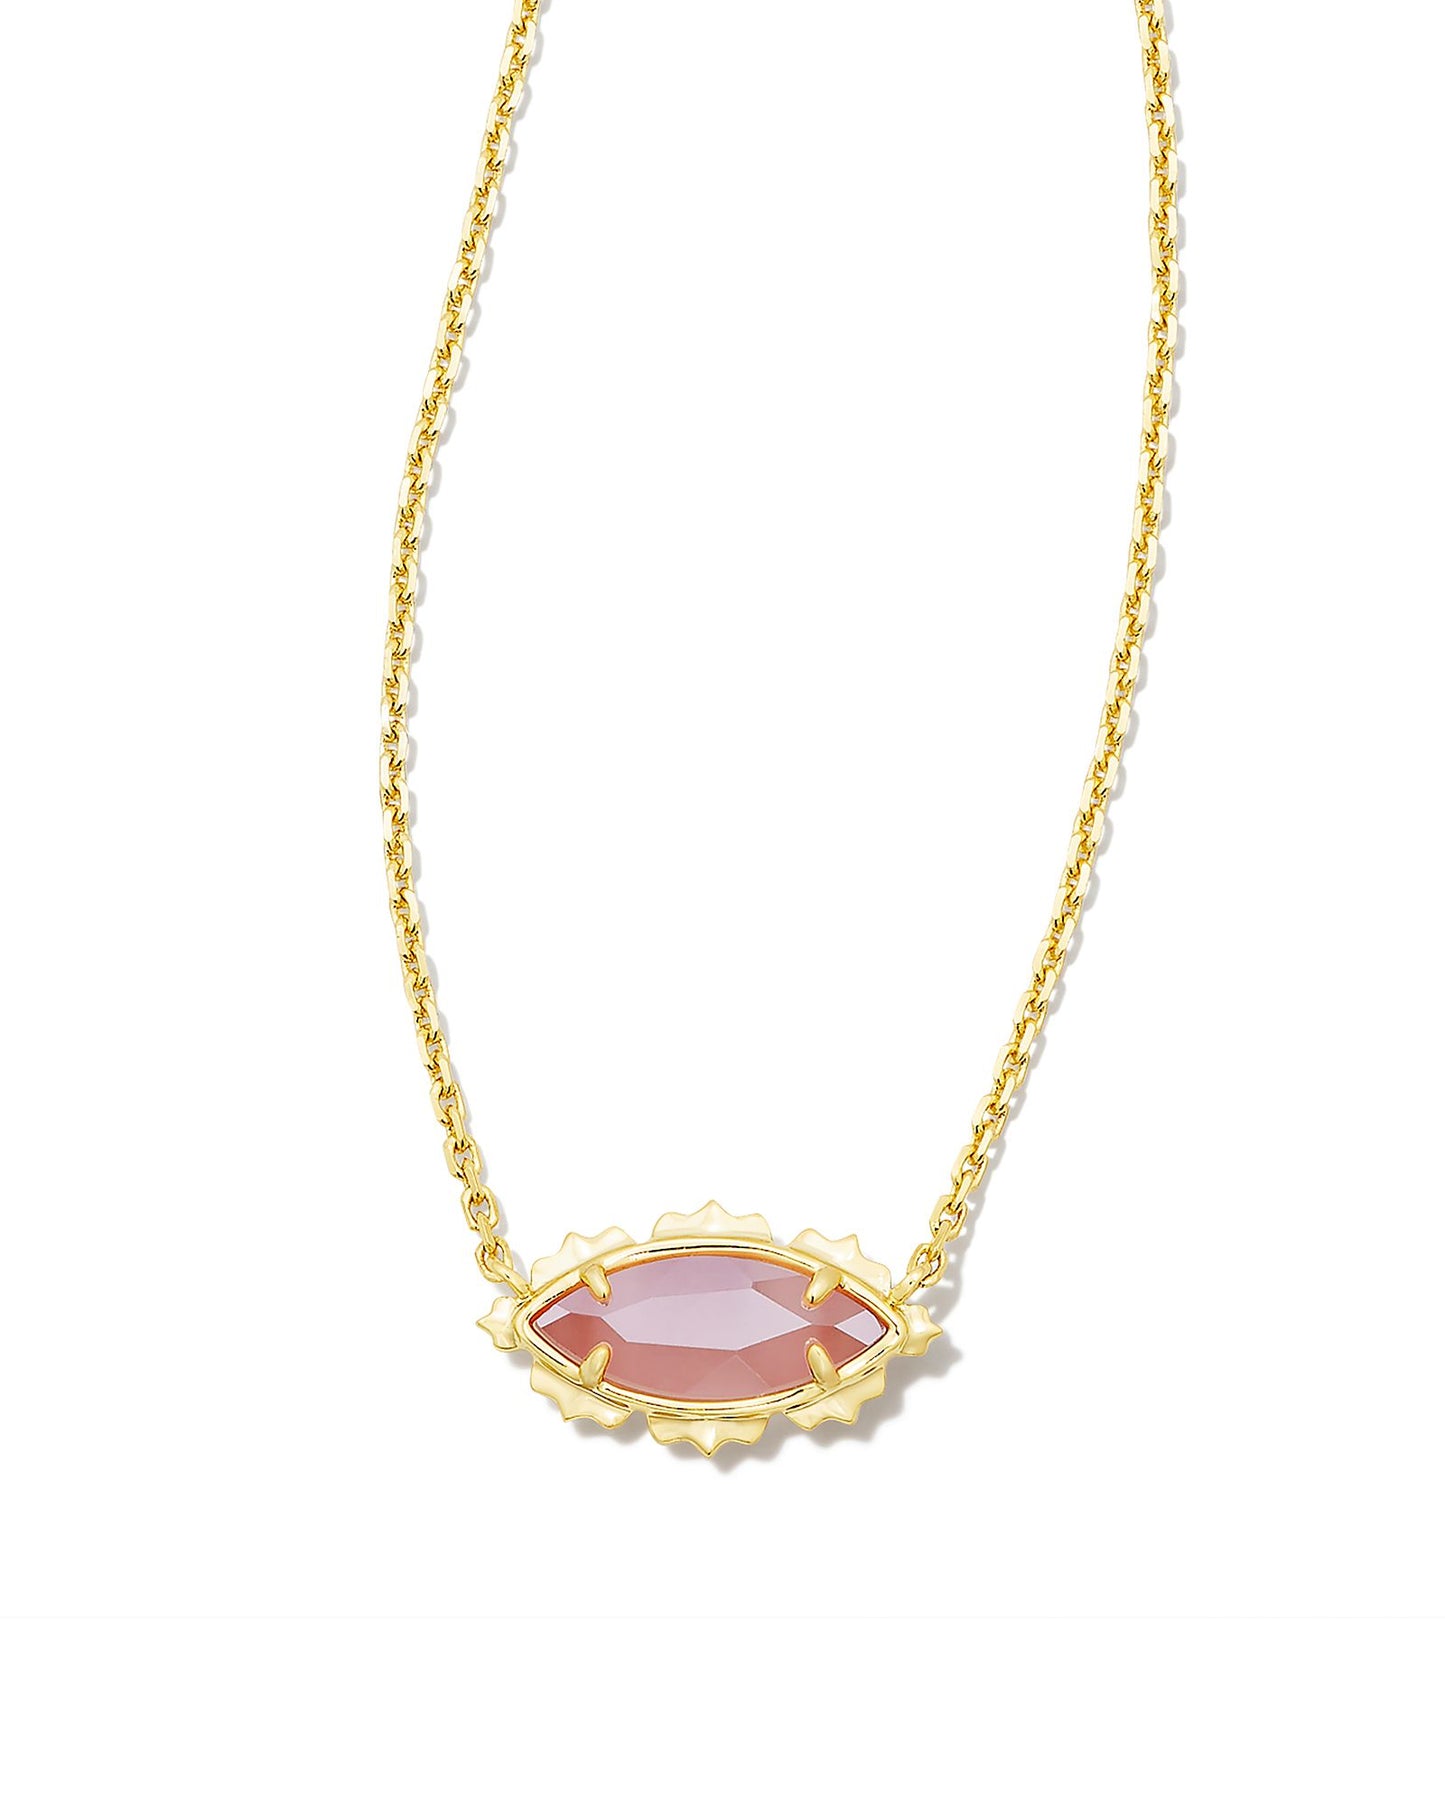 Timeless with a touch of sparkle, the Genevieve Gold Short Pendant Necklace is sure to be your newest everyday essential. Perfect as a standalone piece or an elegant addition to a layered look, this marquise-shaped pendant adds a bit of shine to any occasion.  Dimensions- 16' CHAIN WITH 3' EXTENDER, 0.34'Lx0.6"W PENDENT Metal- 14K Gold plated over brass Closure- Lobster clasp w/ single adjustable slider bead Rose color